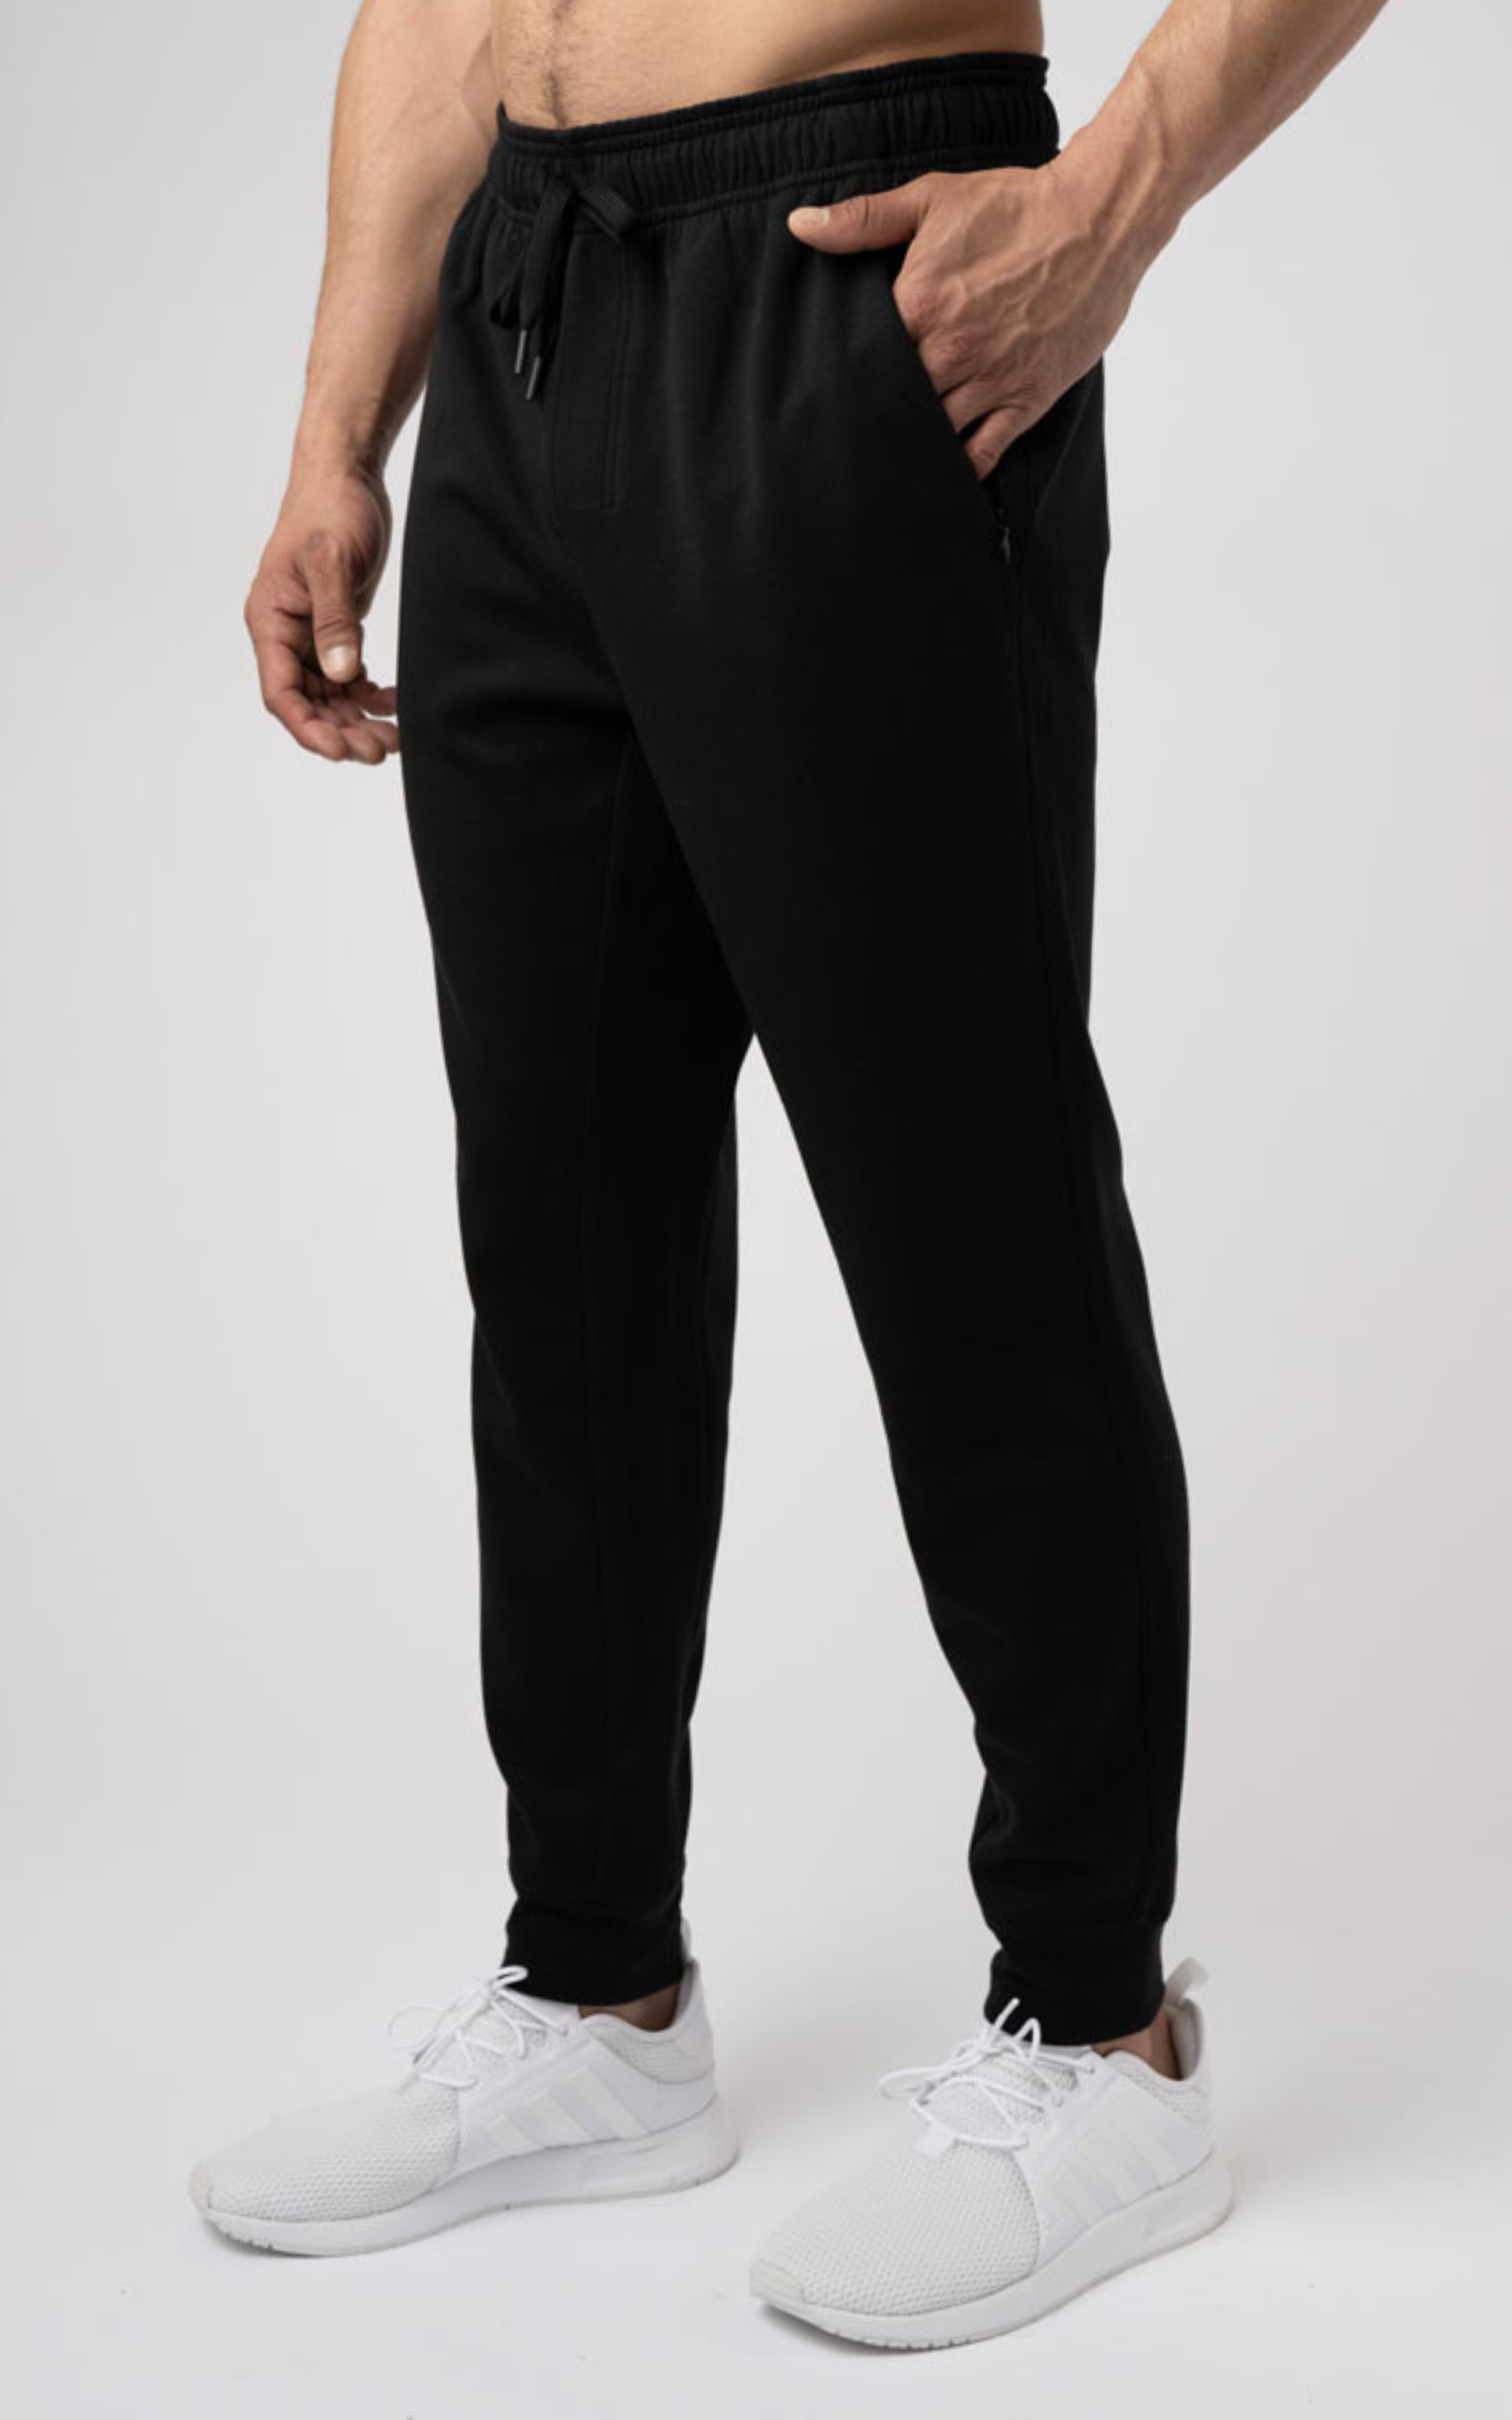 Scuba Side Zip Drawstring Jogger Pant With Pocket Jogger Scuba Knit Pocket  Jogger Sweat Pants Sweats 